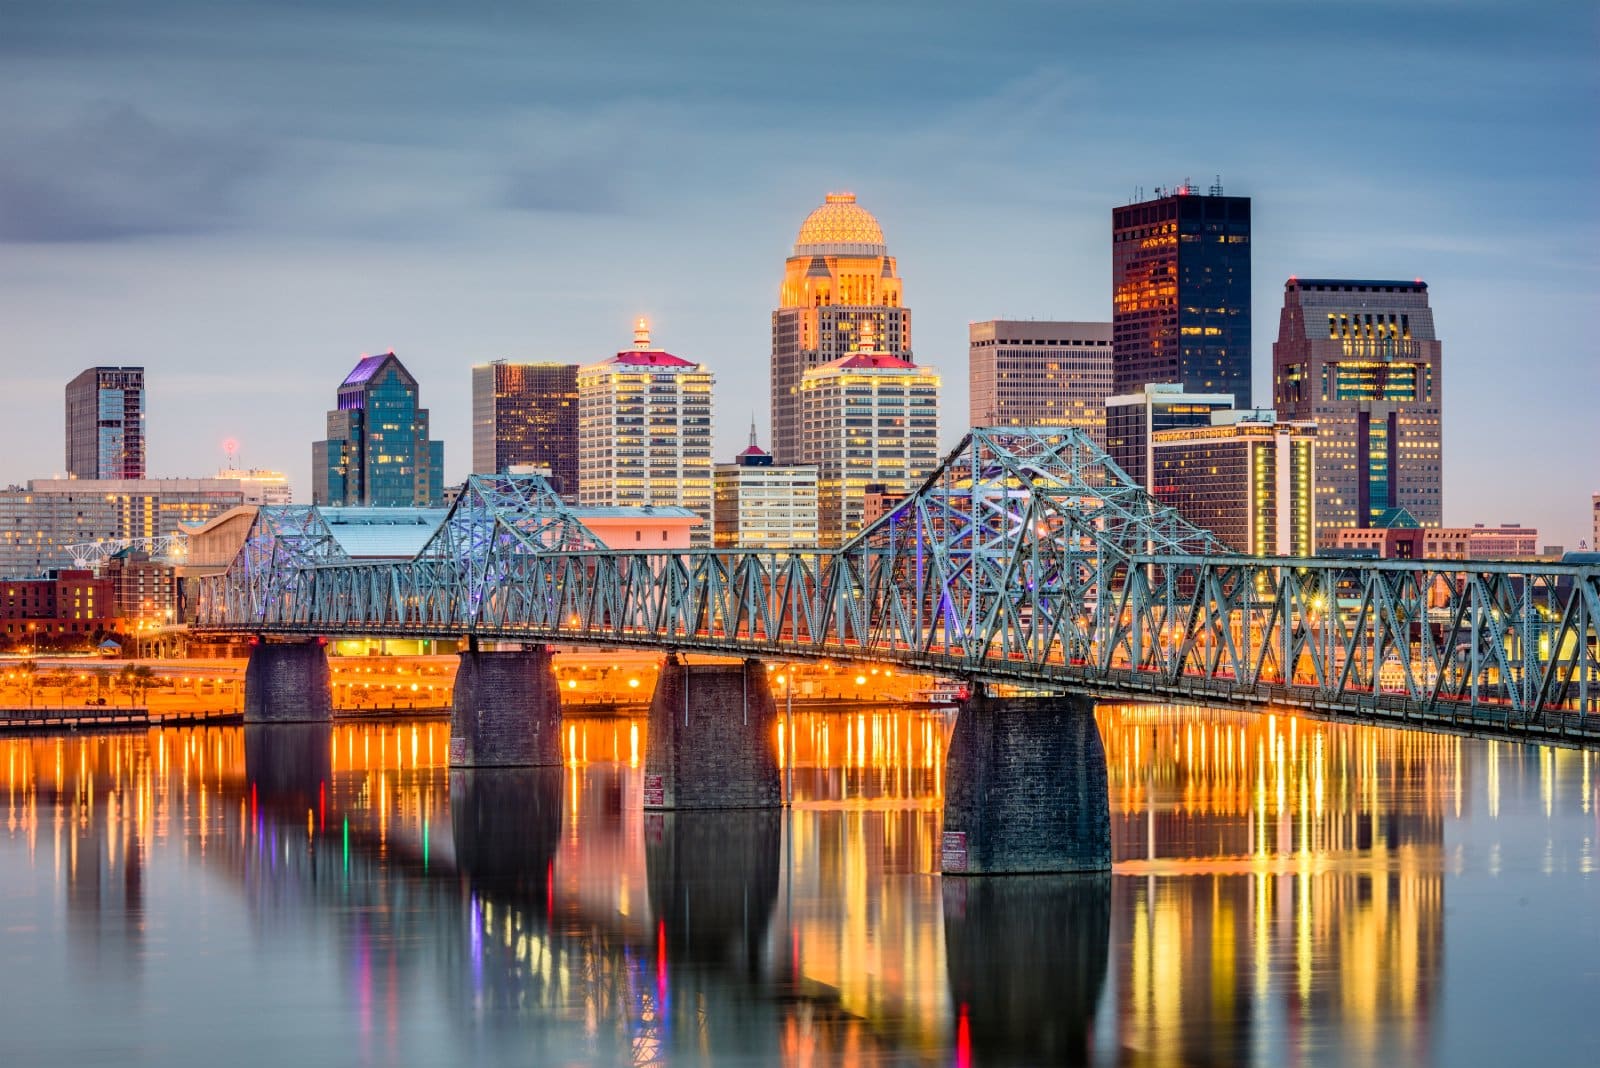 <p>Louisville’s affordability is met with a somewhat limited job market outside its renowned bourbon and shipping industries. However, its rich arts culture and the excitement of the Kentucky Derby provide a unique living experience that’s hard to find elsewhere.</p>